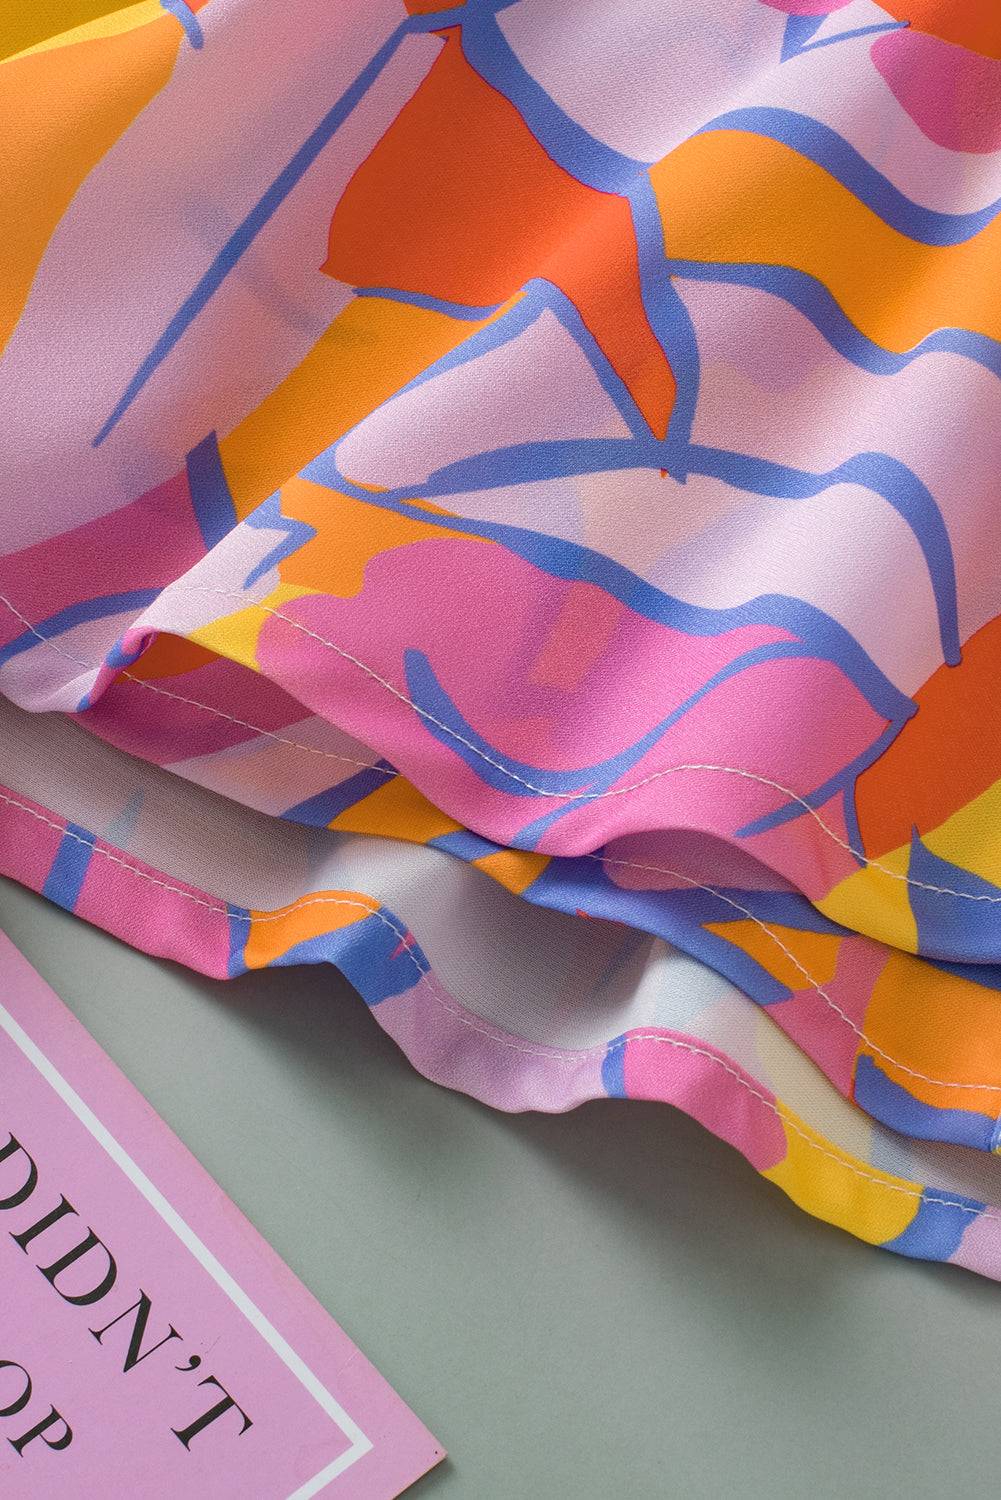 a close up of a colorful dress on a table